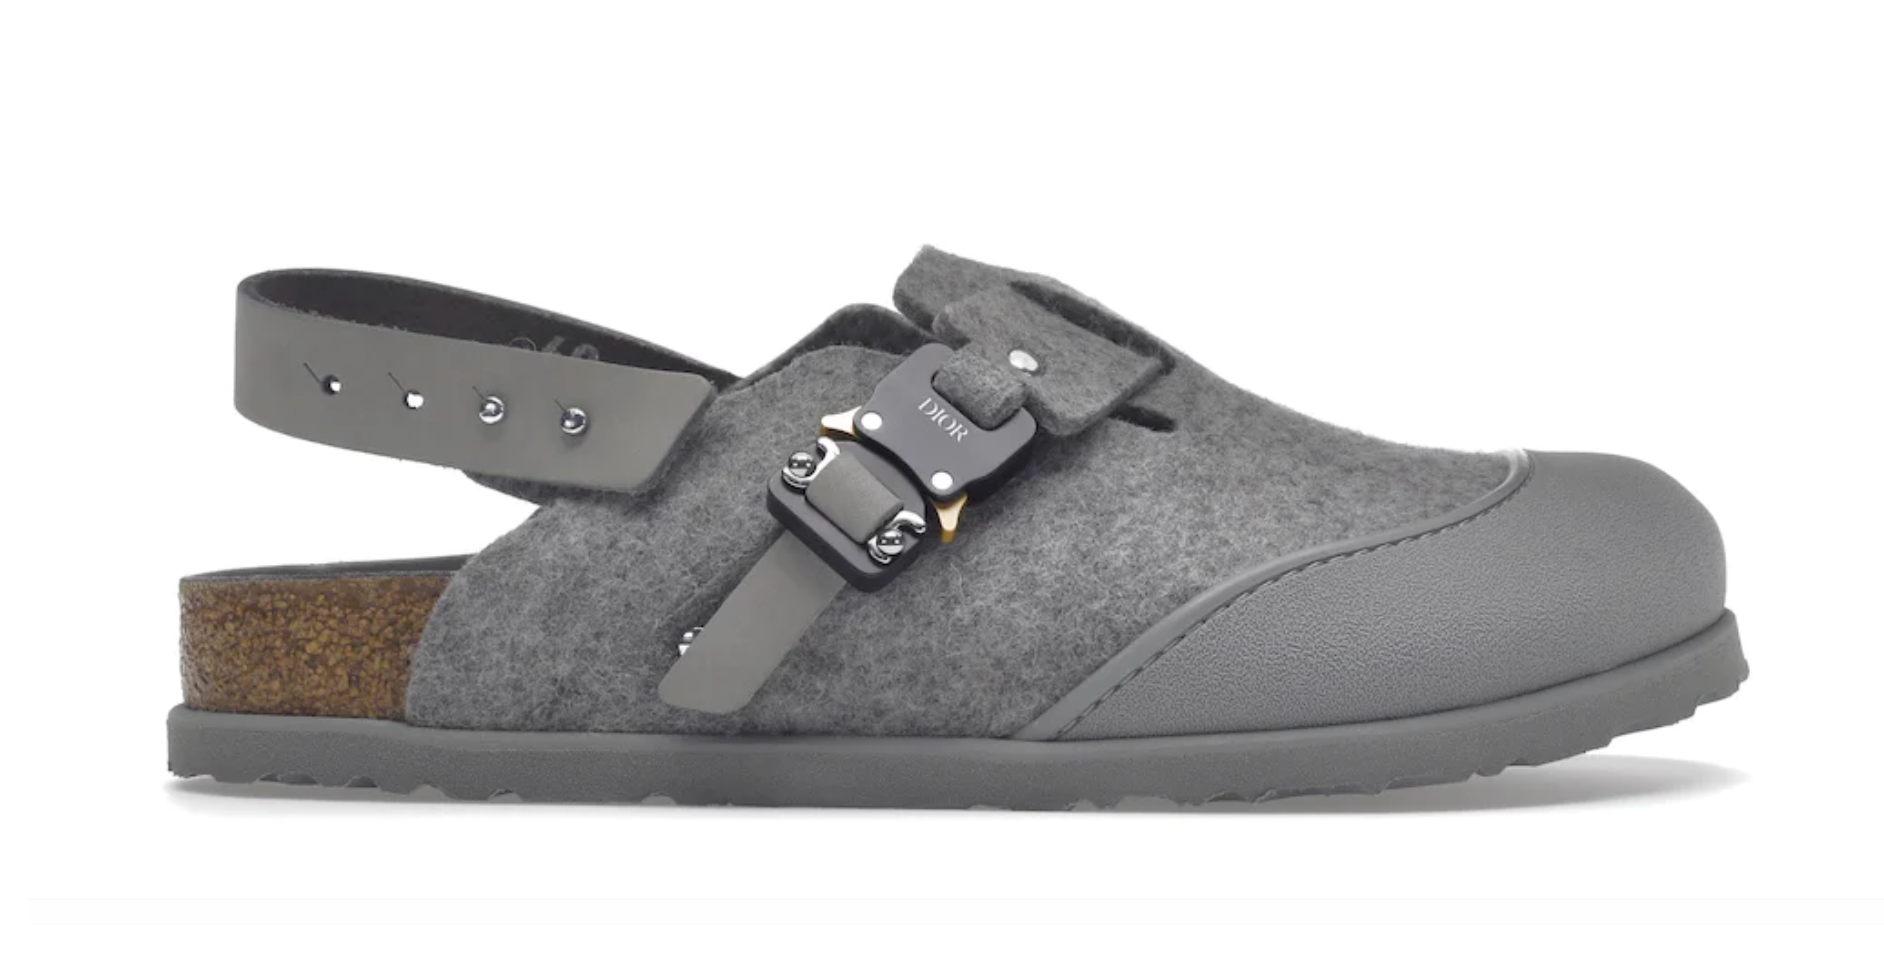 Dior Unveiled Their Collaboration With Birkenstock And It's *The